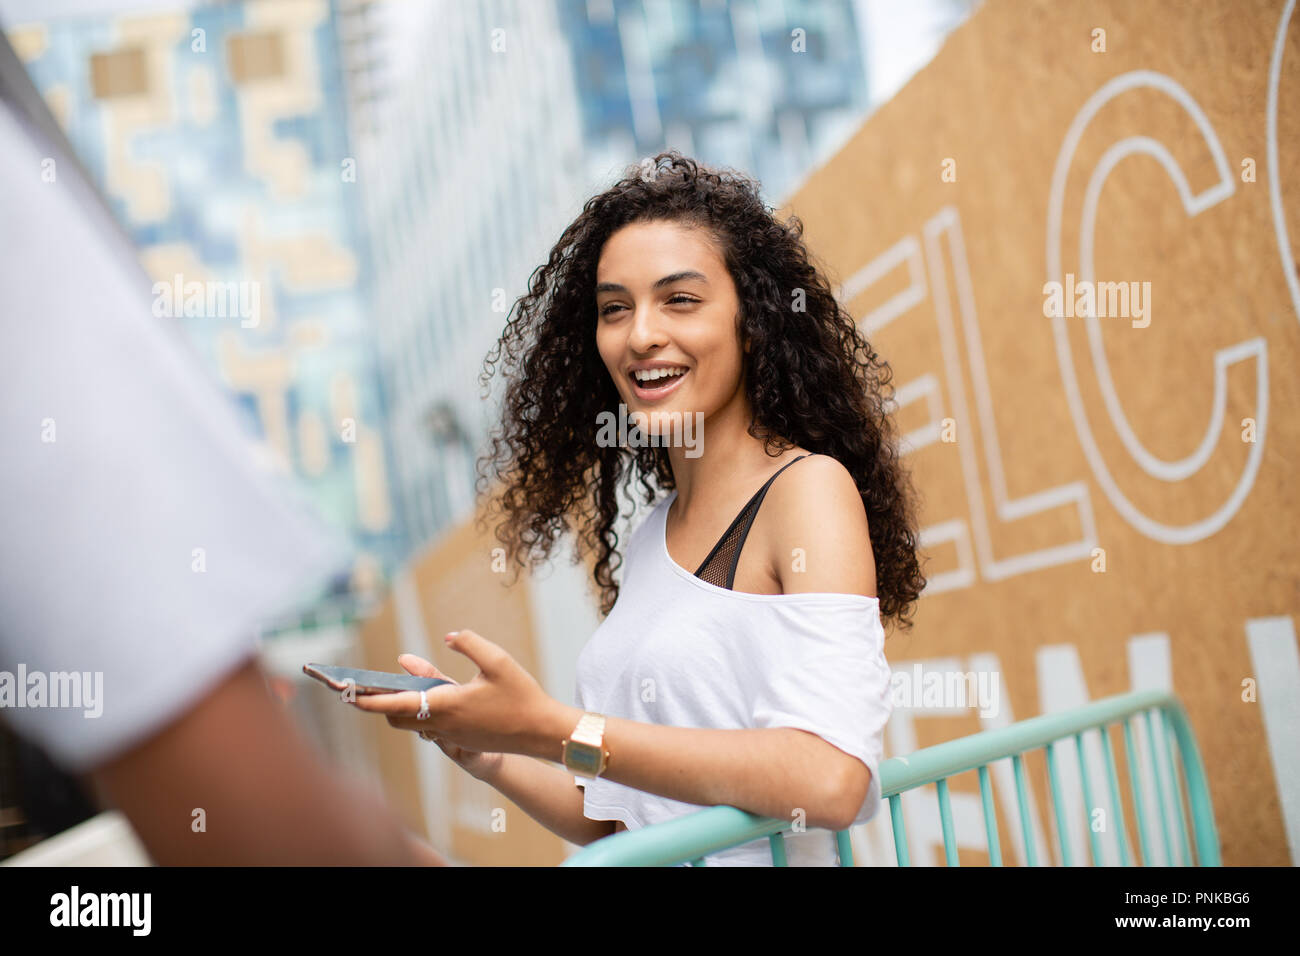 Teenagers socialising outdoors in city Stock Photo